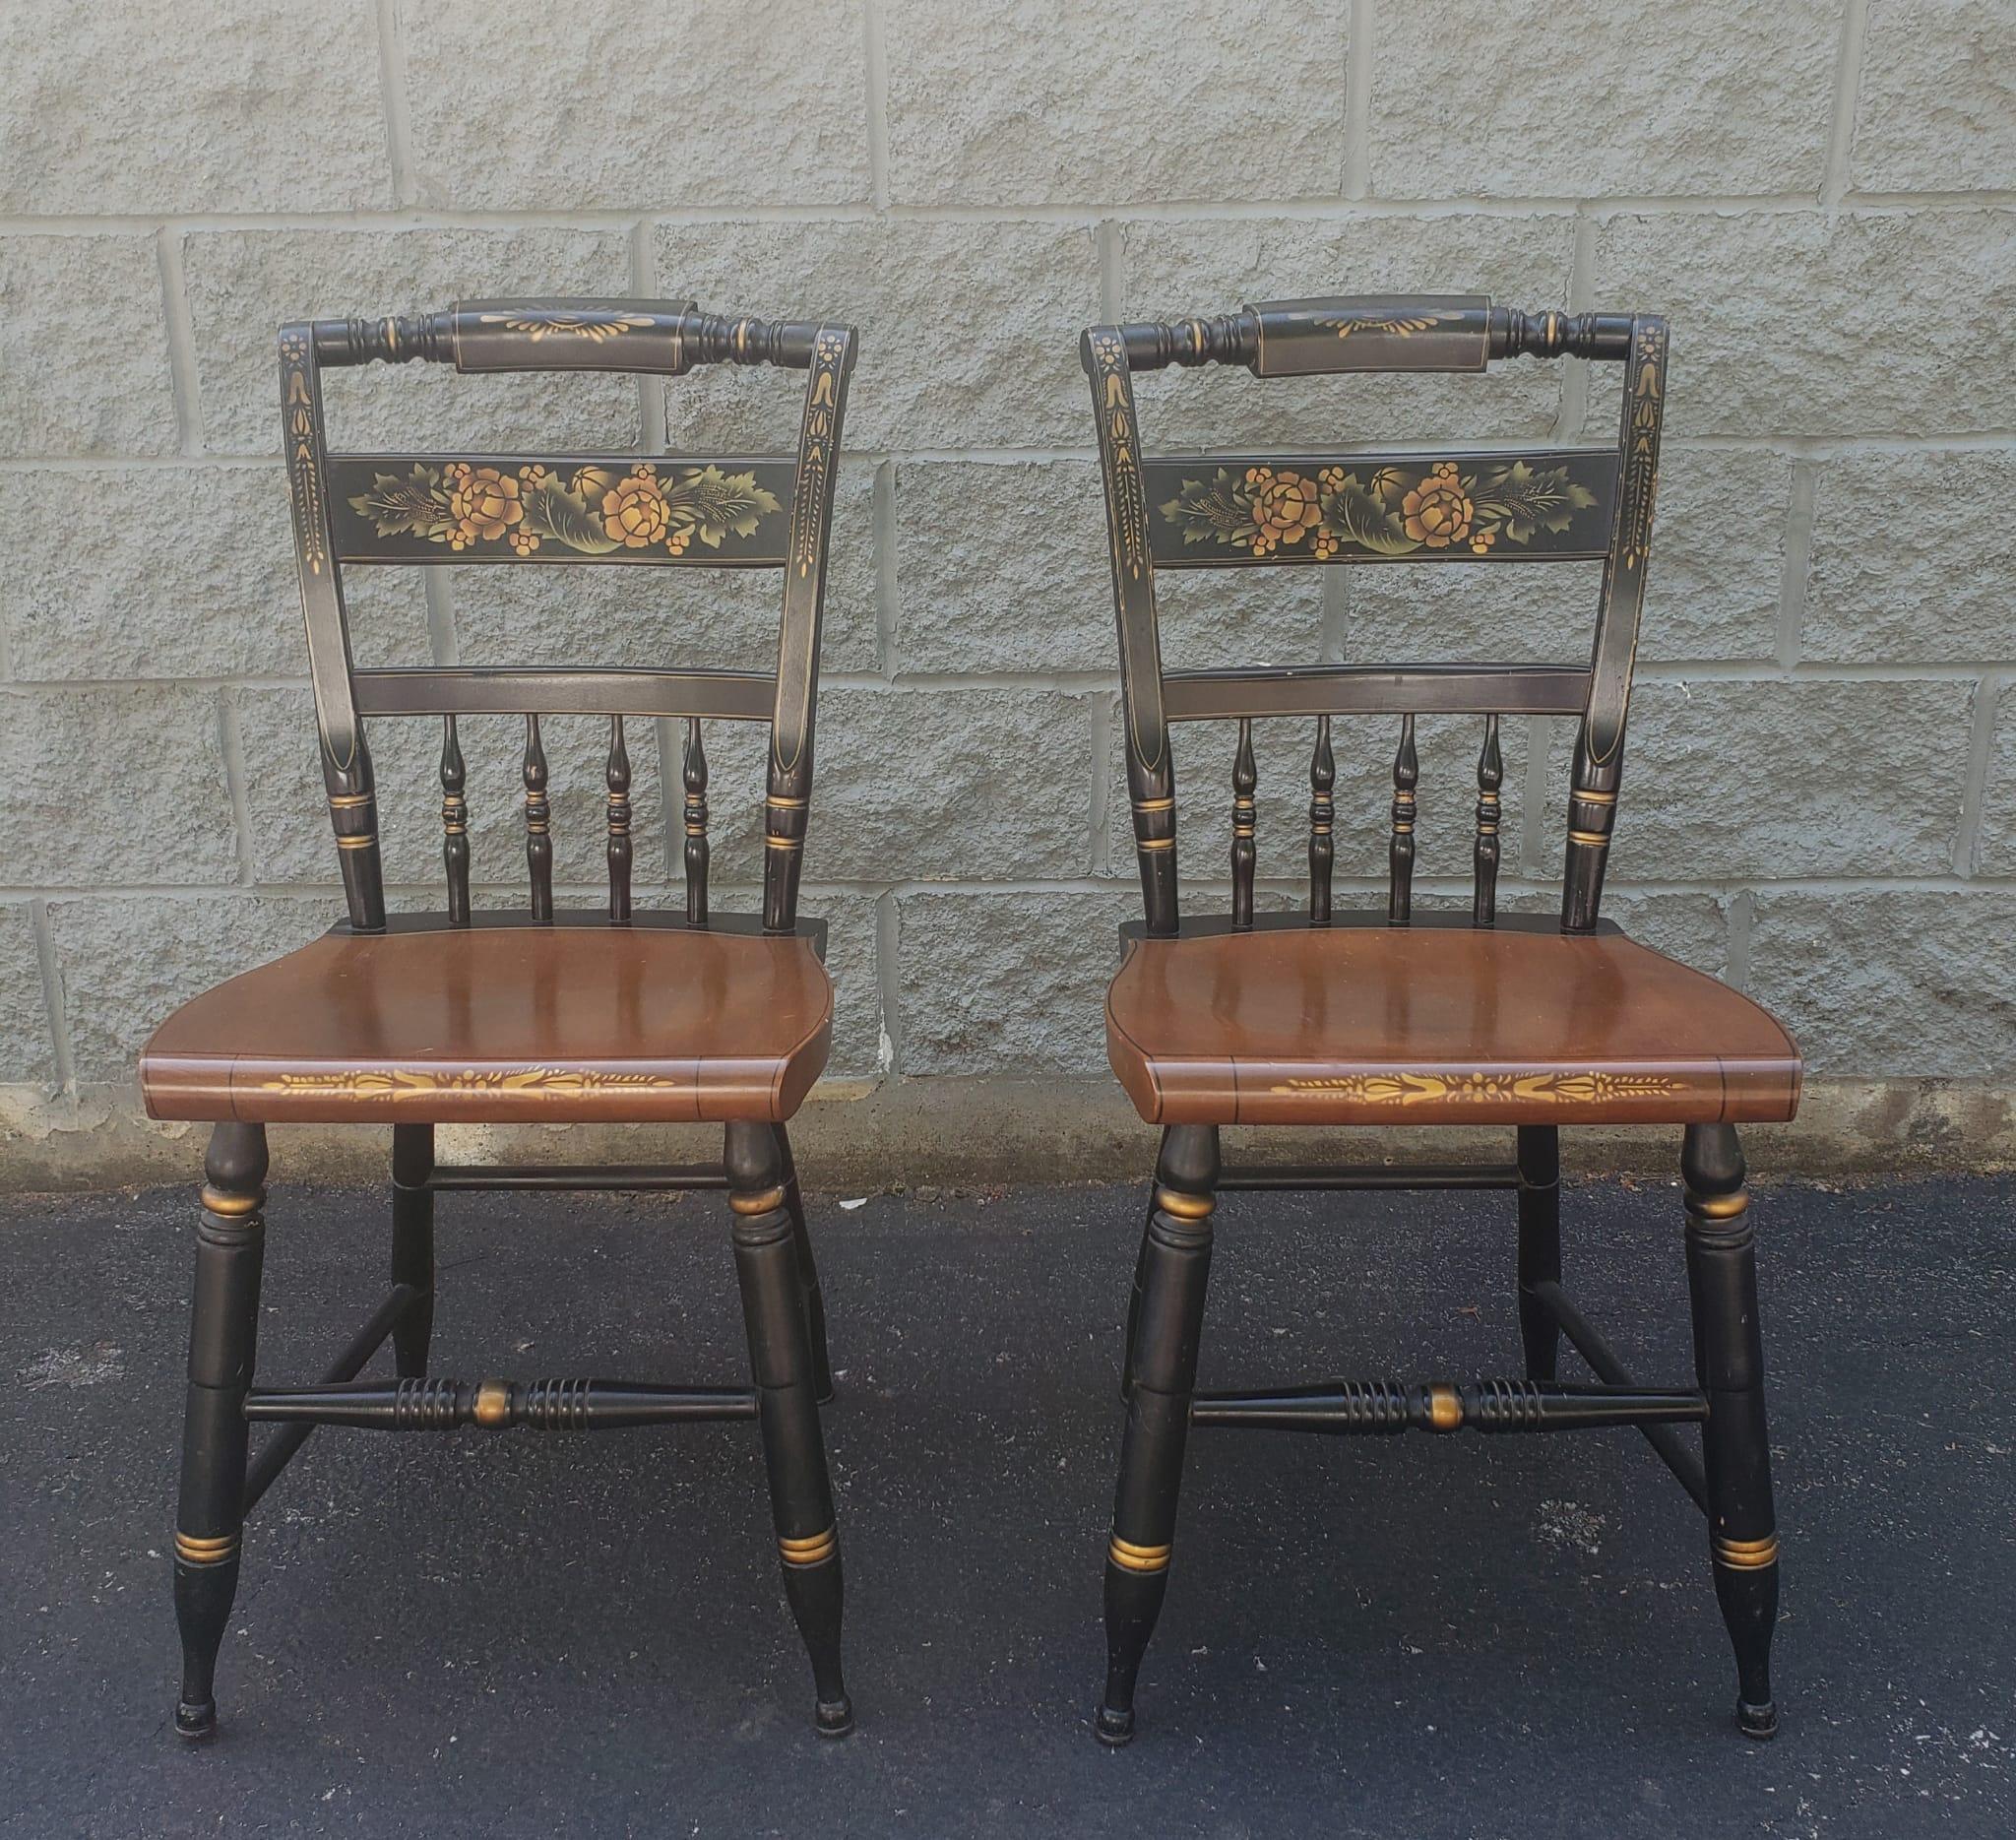 Set of 4 Lambert Hitchcock Ebonized and Gilt Ornate Maple Dining Chairs In Good Condition For Sale In Germantown, MD